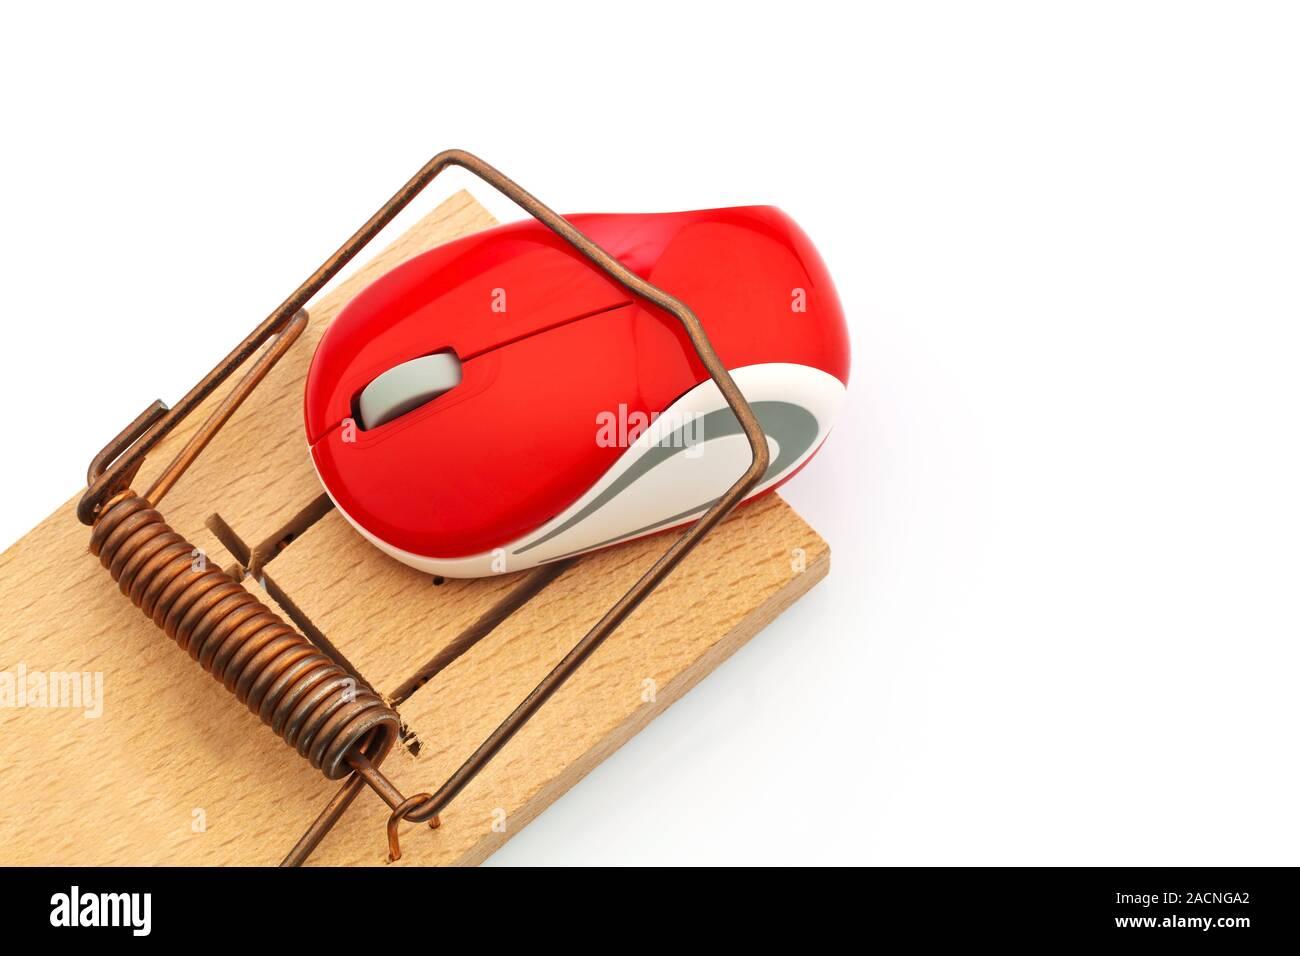 Computer mouse in mouse trap Stock Photo - Alamy